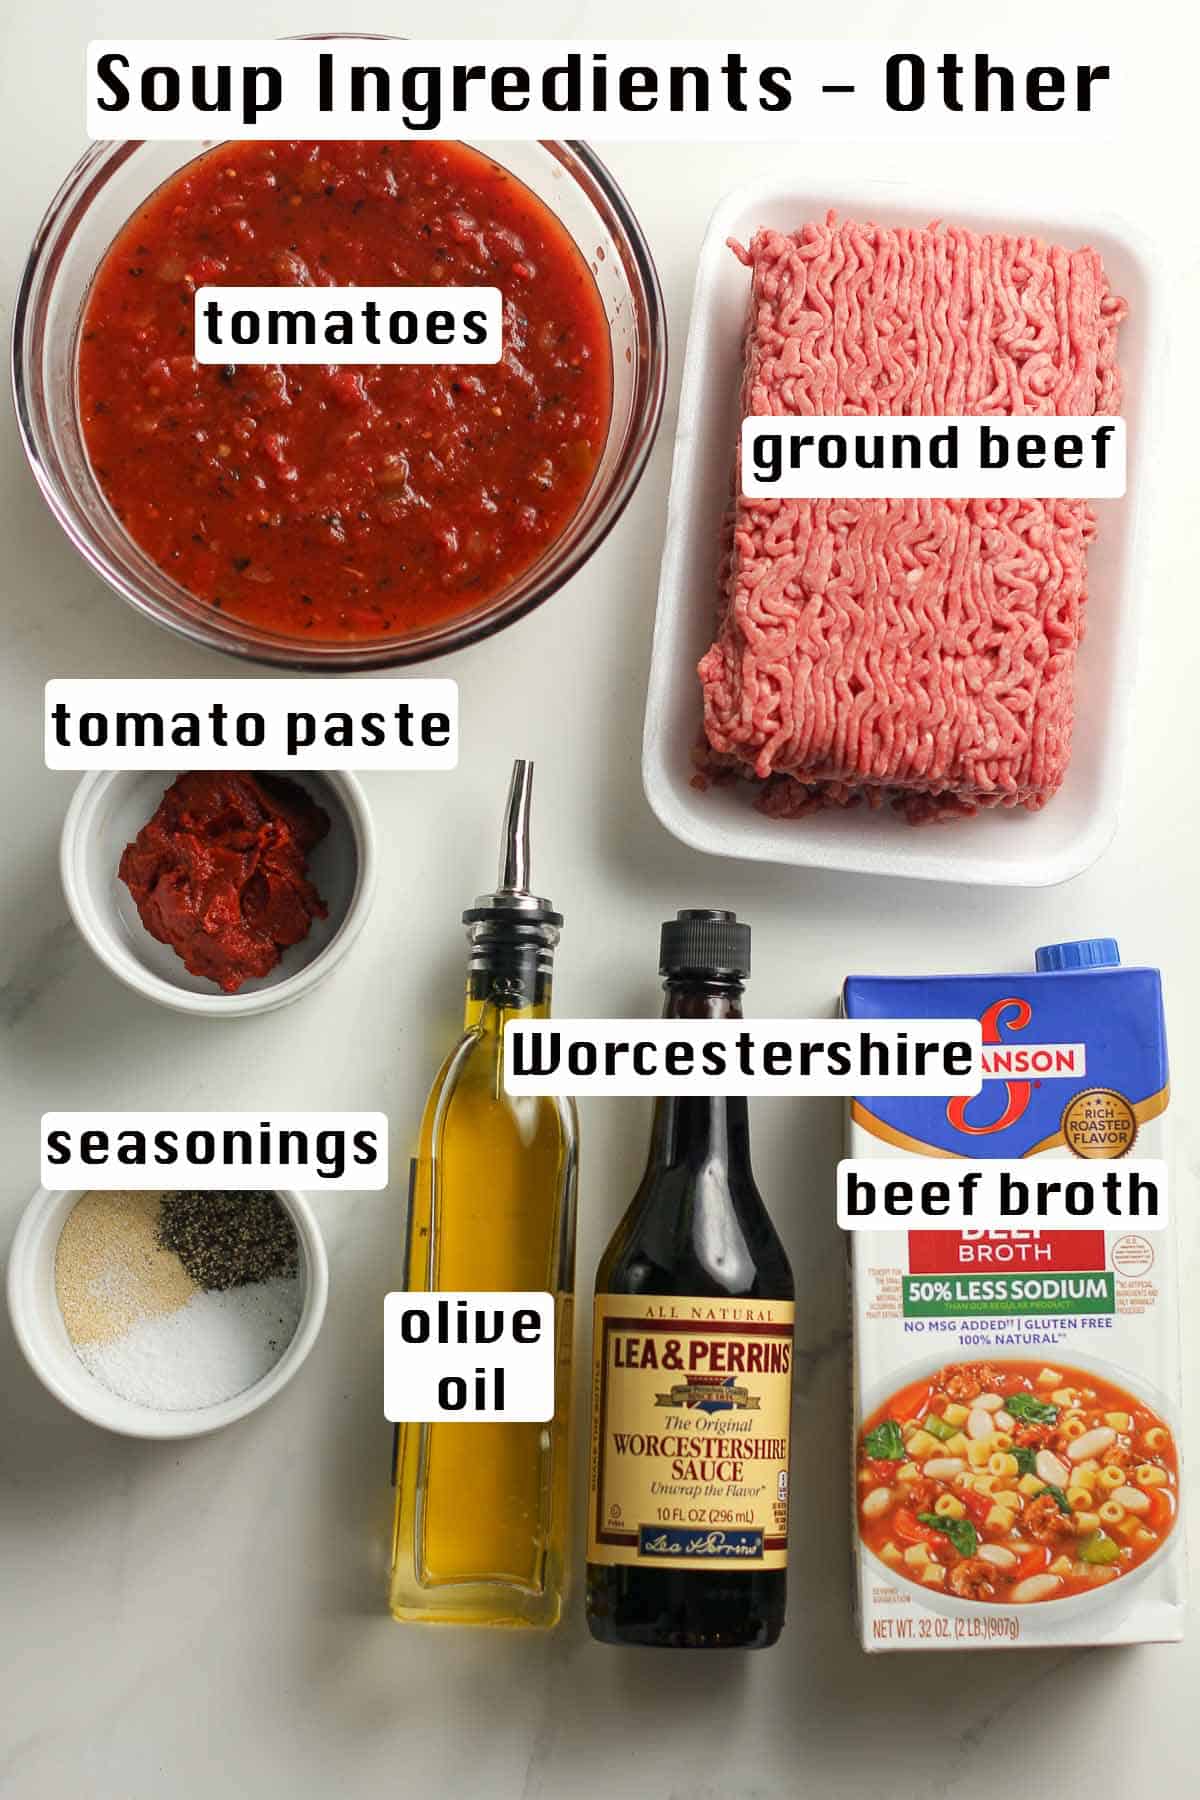 The soup ingredients in addition to veggies - ground beef, tomatoes, seasonings etc.